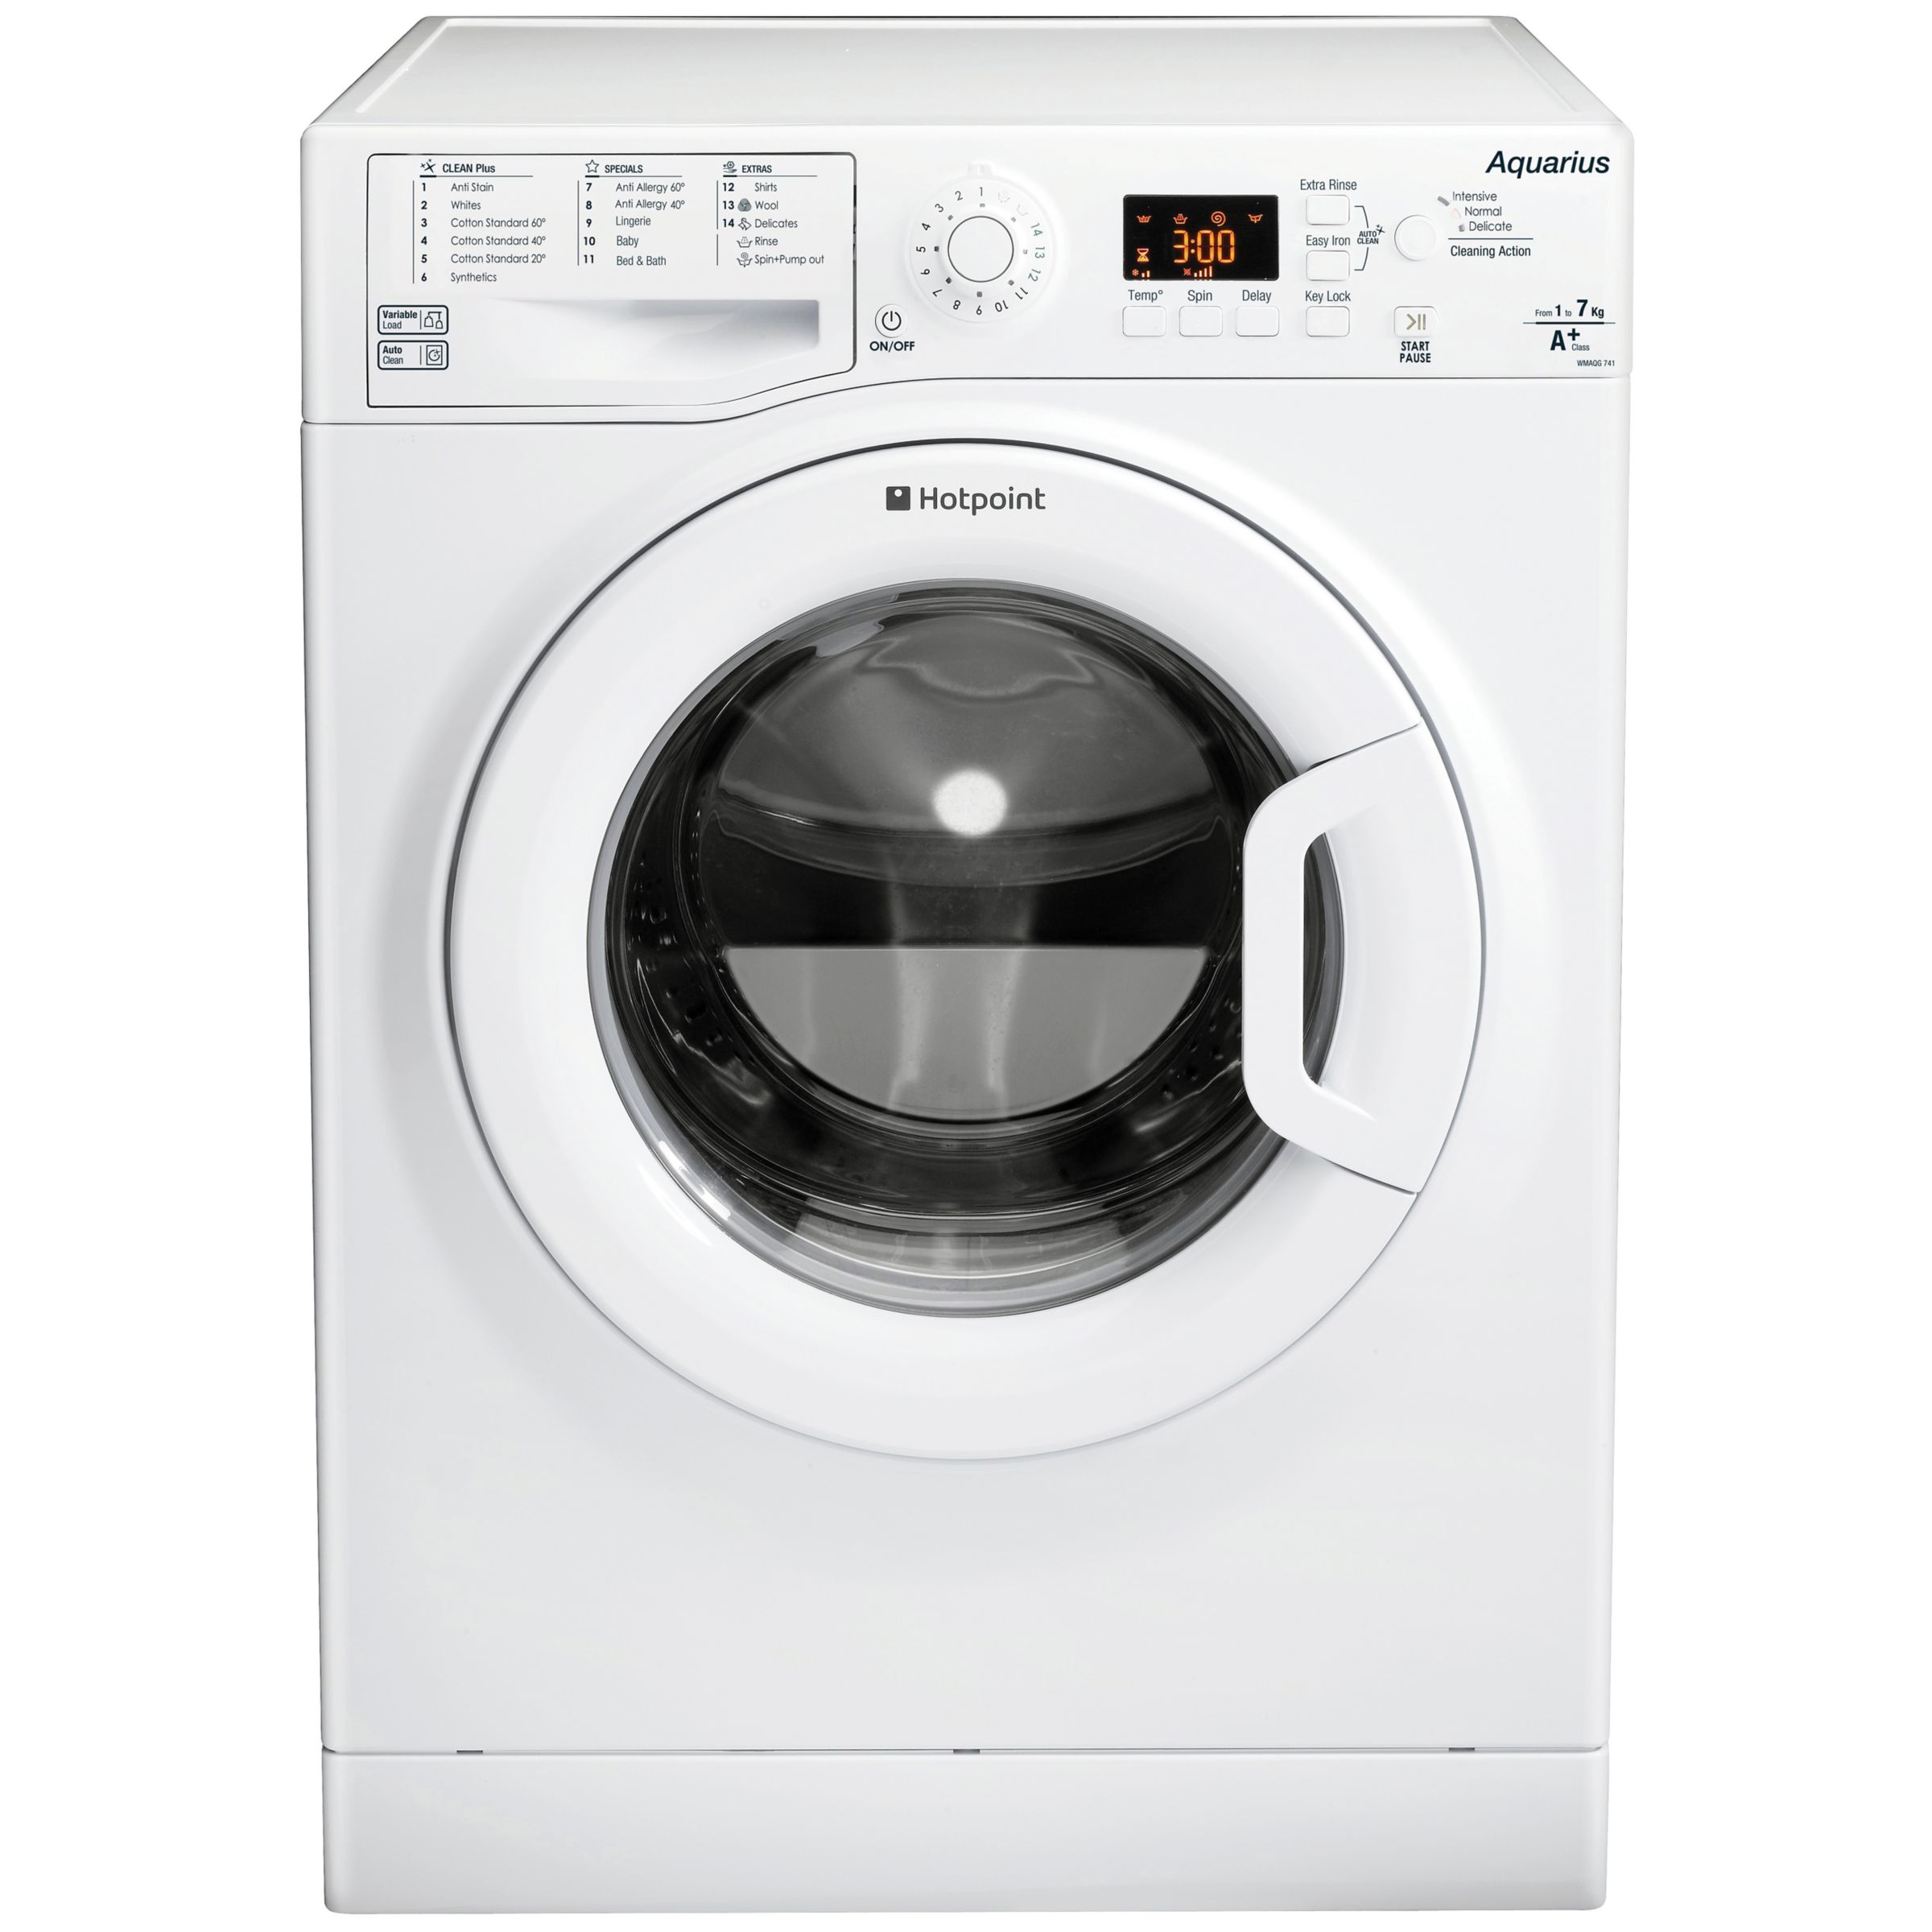 Hotpoint WMAQG741P Freestanding Washing Machine, 7kg Load, A+ Energy Rating, 1400rpm Spin in White